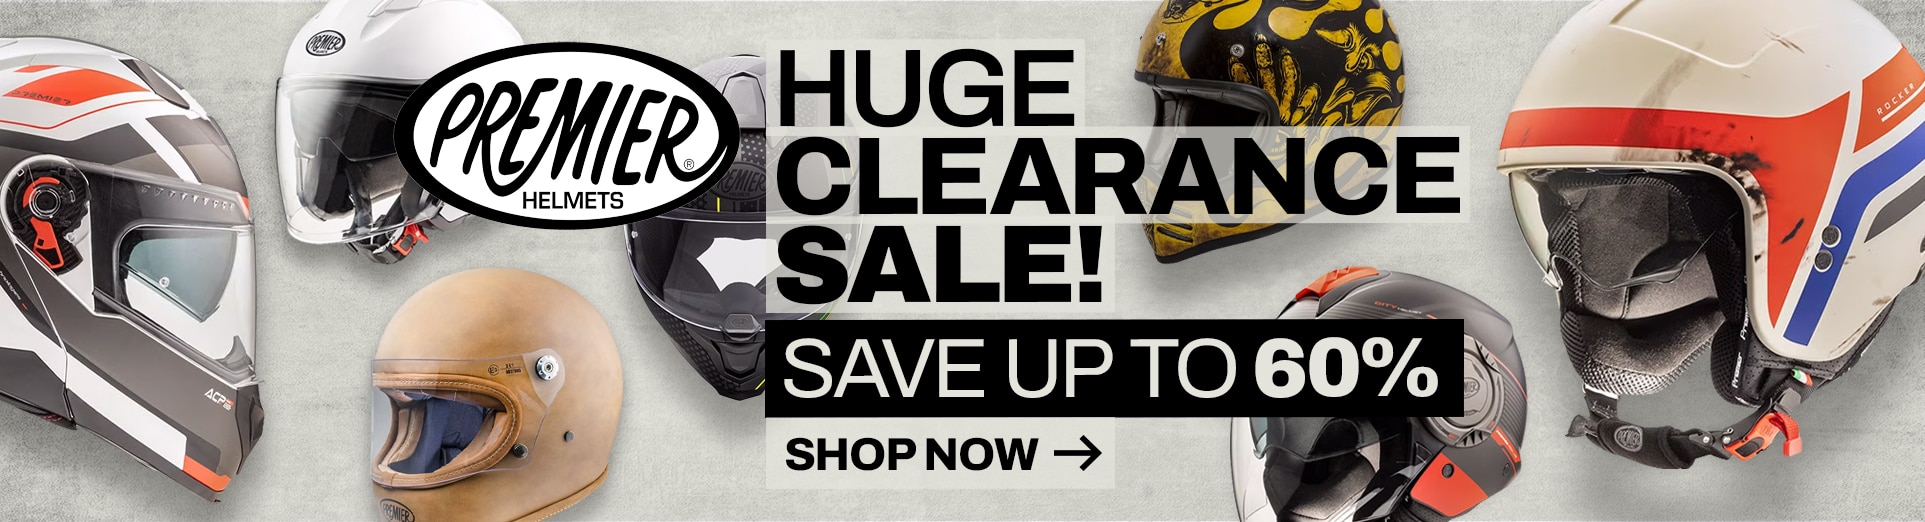 Premier helmet clearance - Save up to 60%